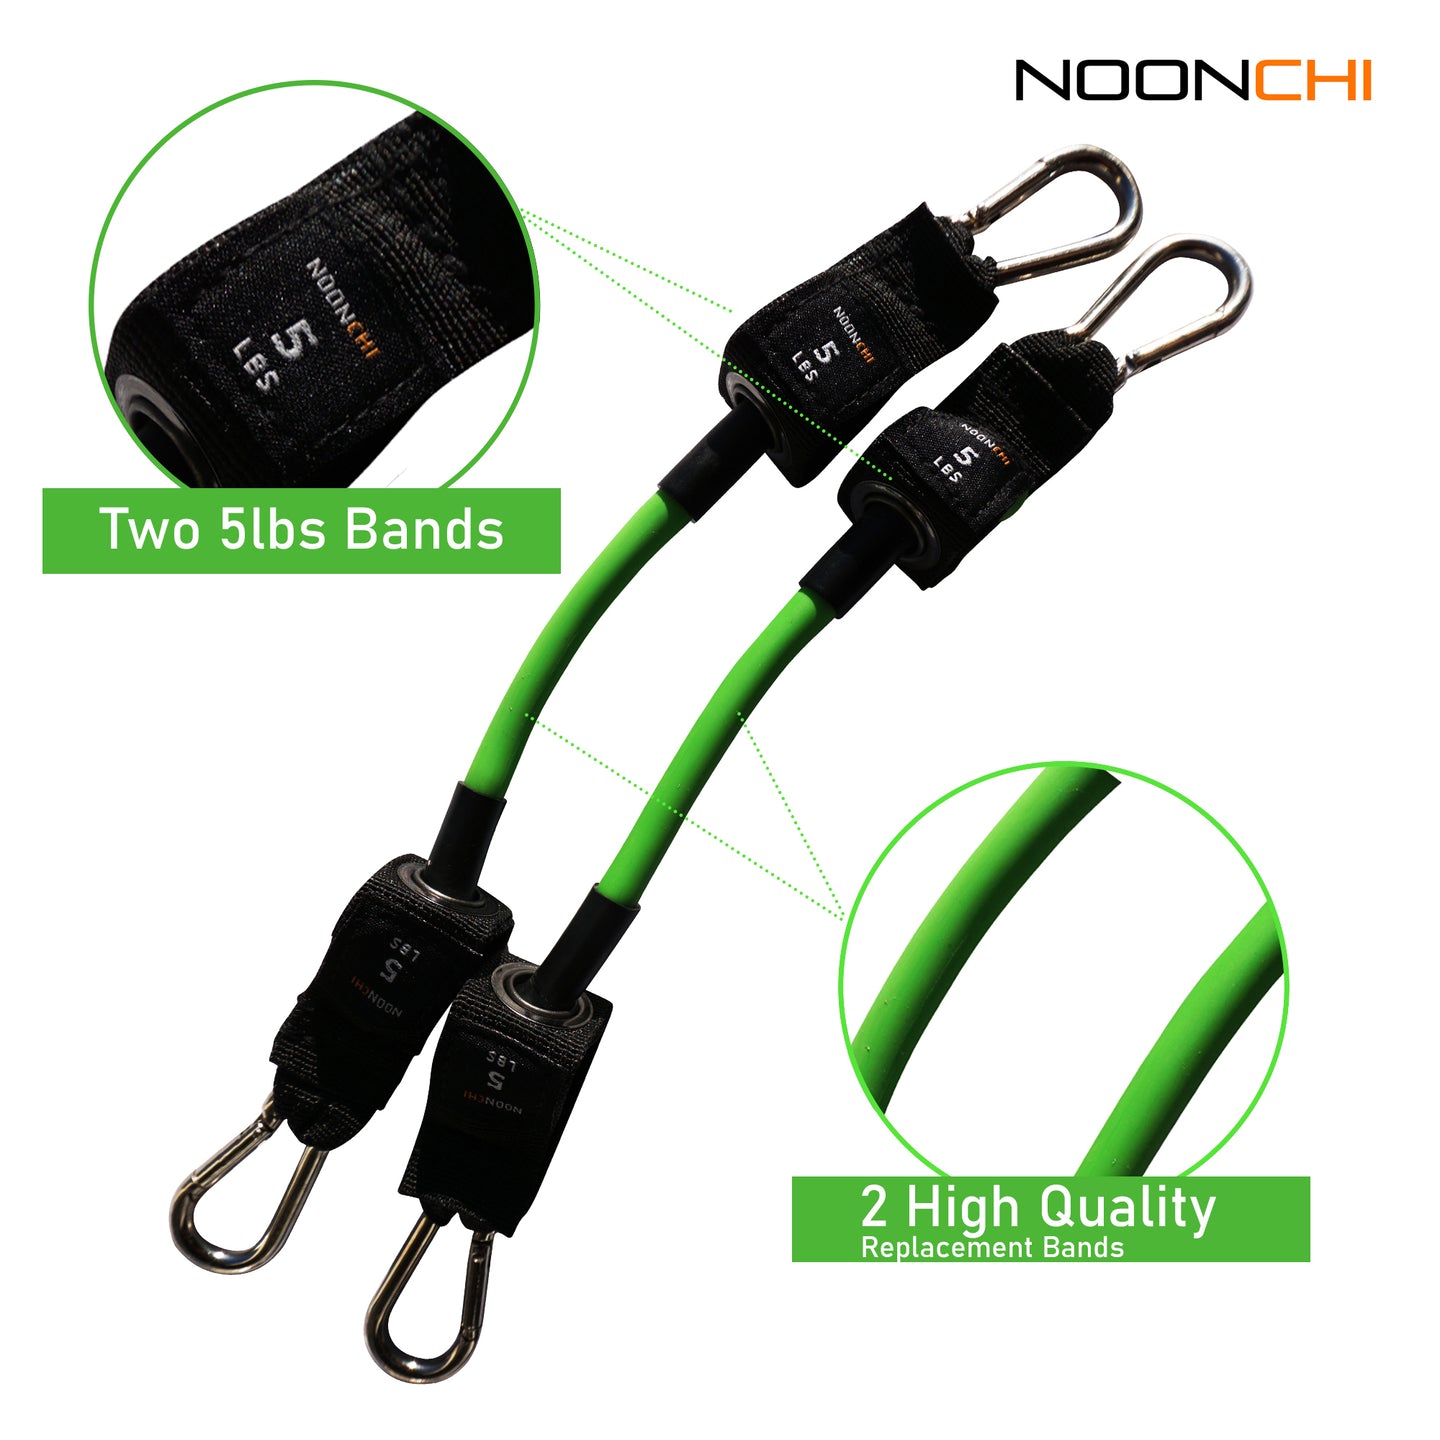 Noonchi replacement 5 lb band set